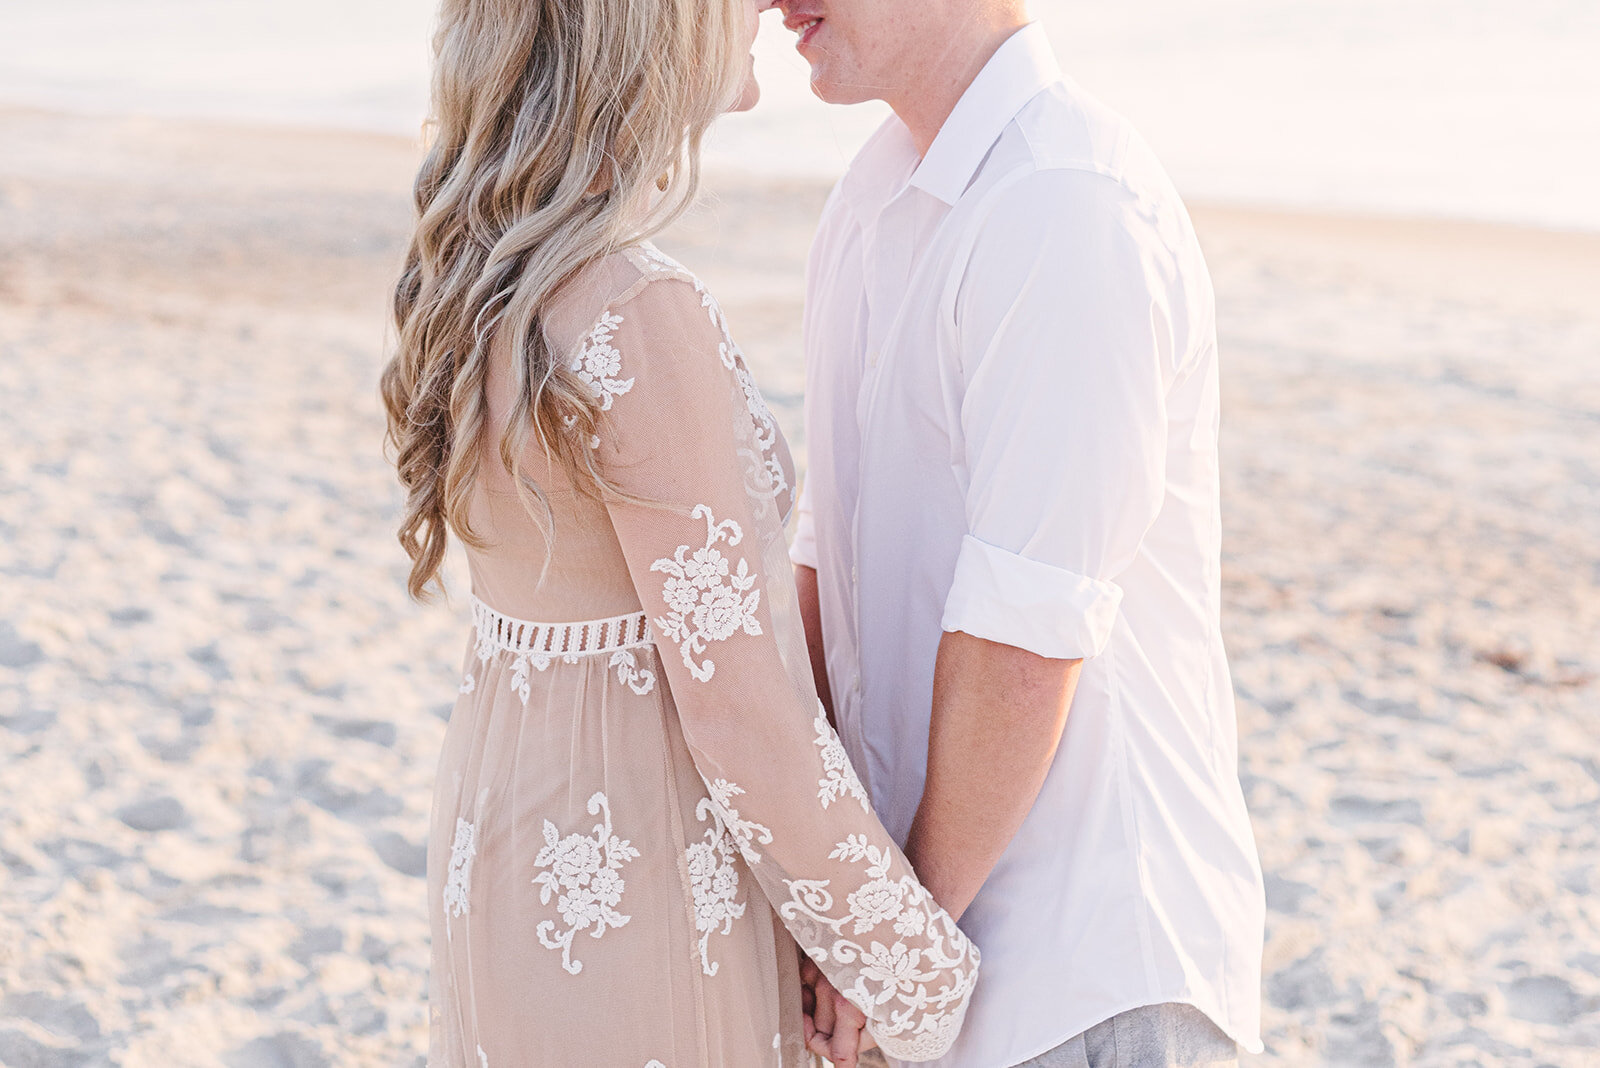  couple holding hands on beach for engagement photos 